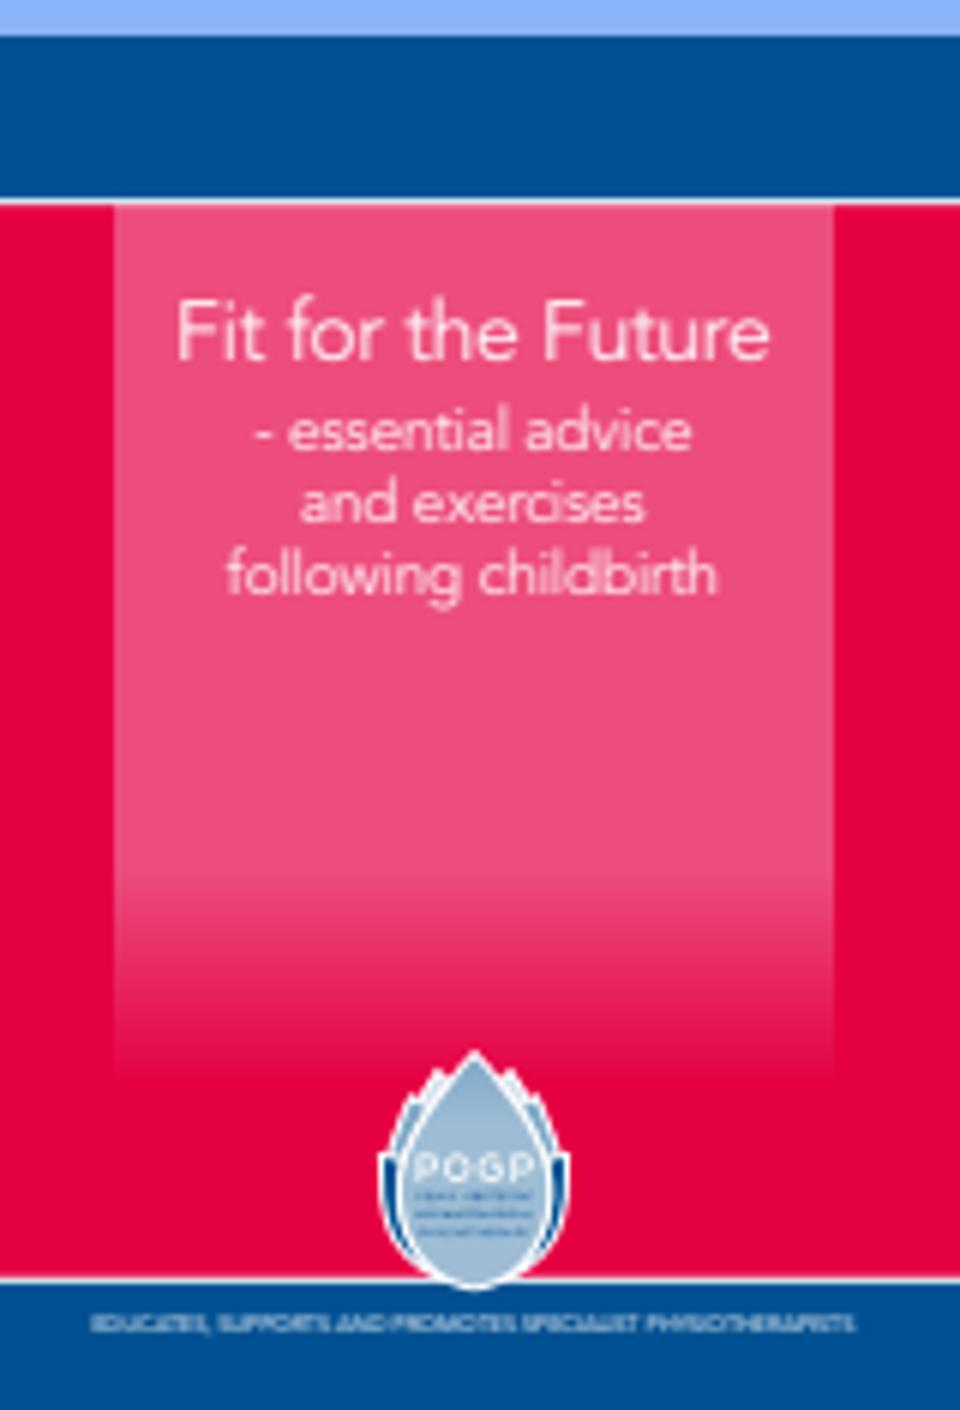 fit for the future essential advice following childbirth